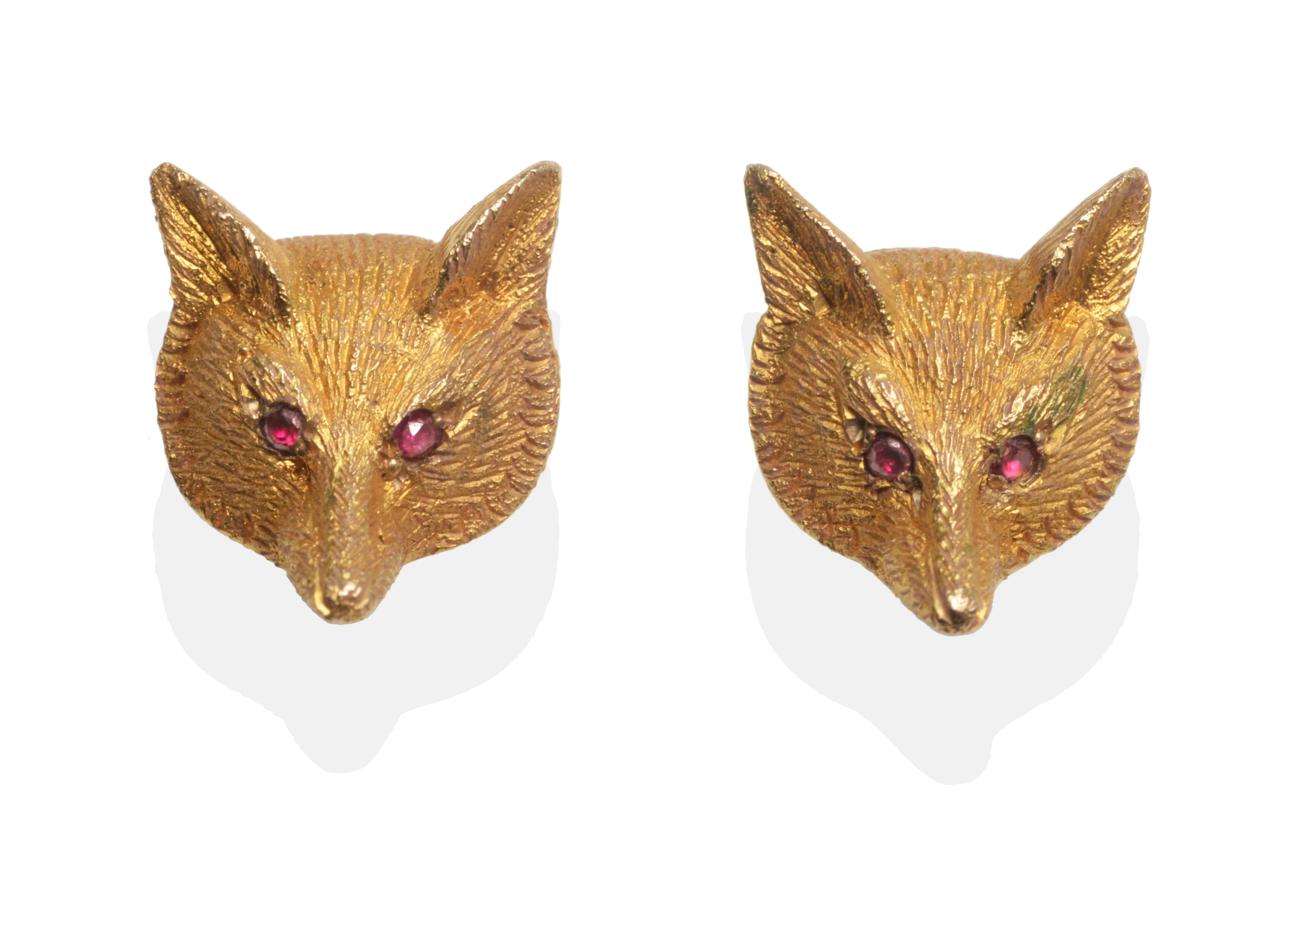 A Pair of 9 Carat Gold Fox Earrings, a fox head realistically modelled with textured fur and ruby